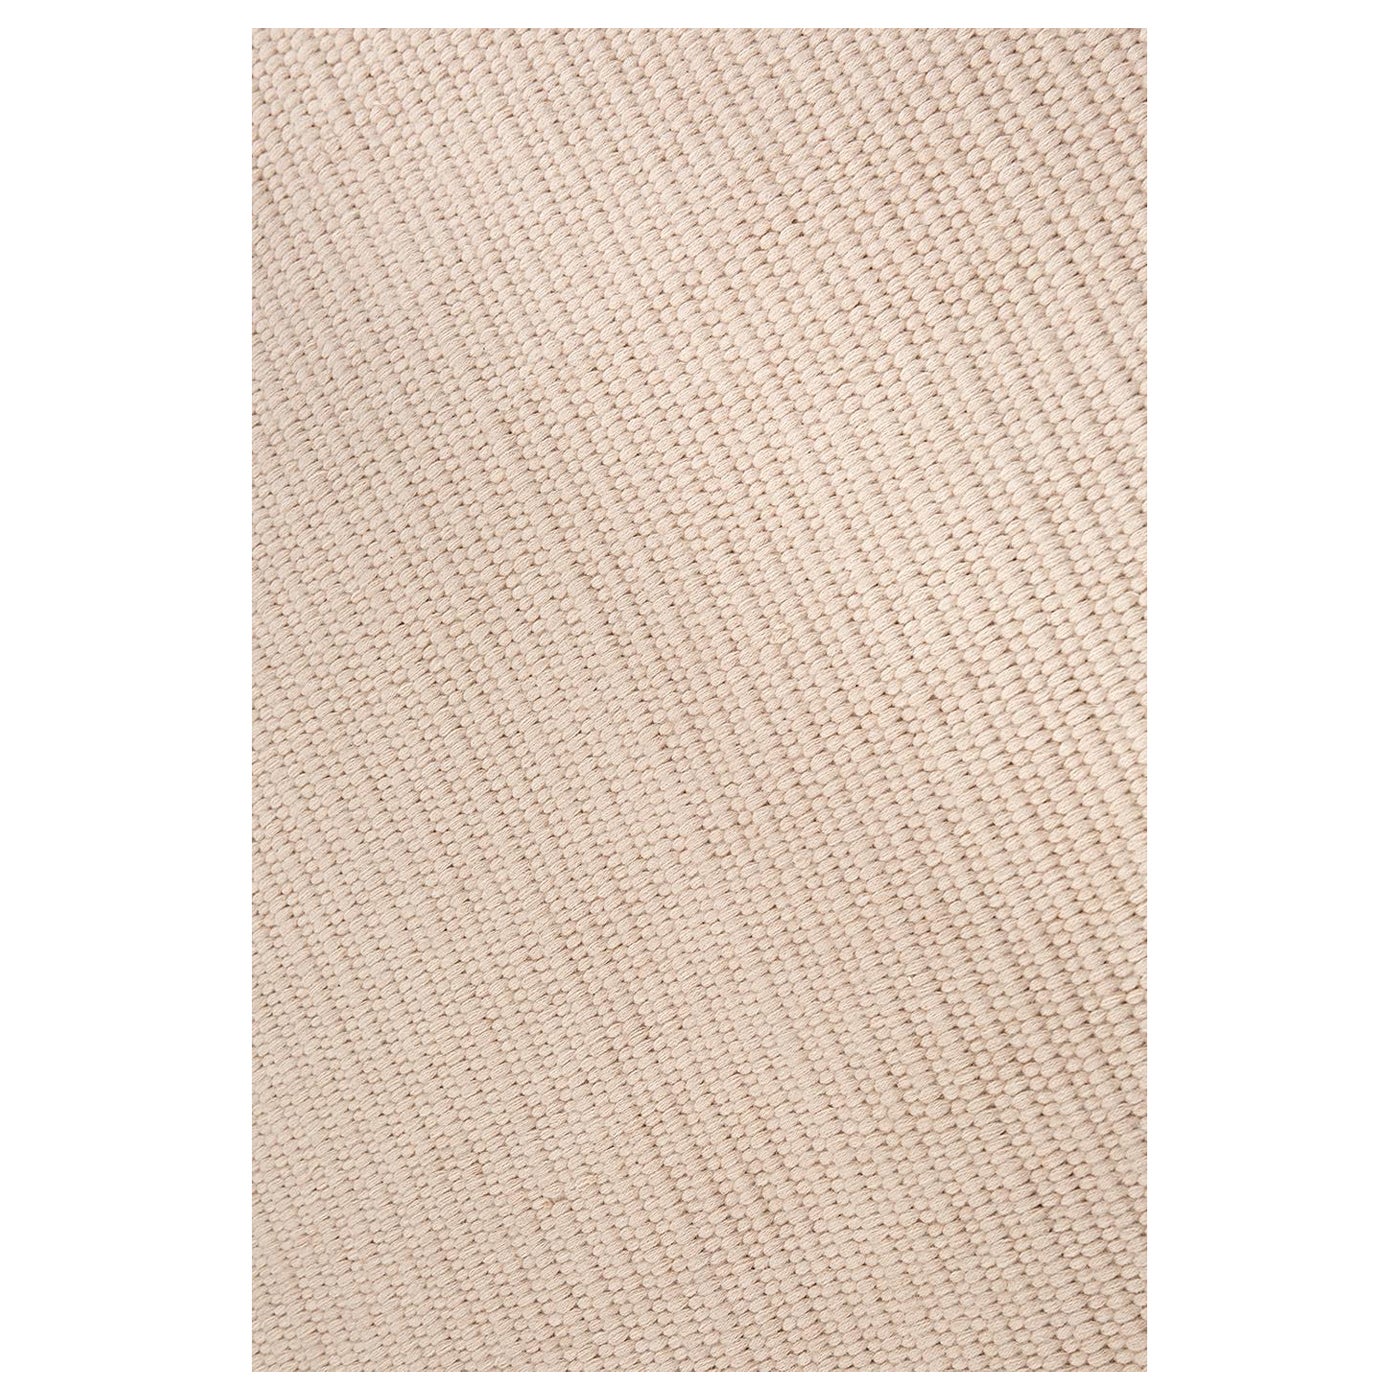 Step Into Luxury - 'Mesh' Rug - 170 x 240 cm - Hand-Woven in Sustainable Alpaca For Sale